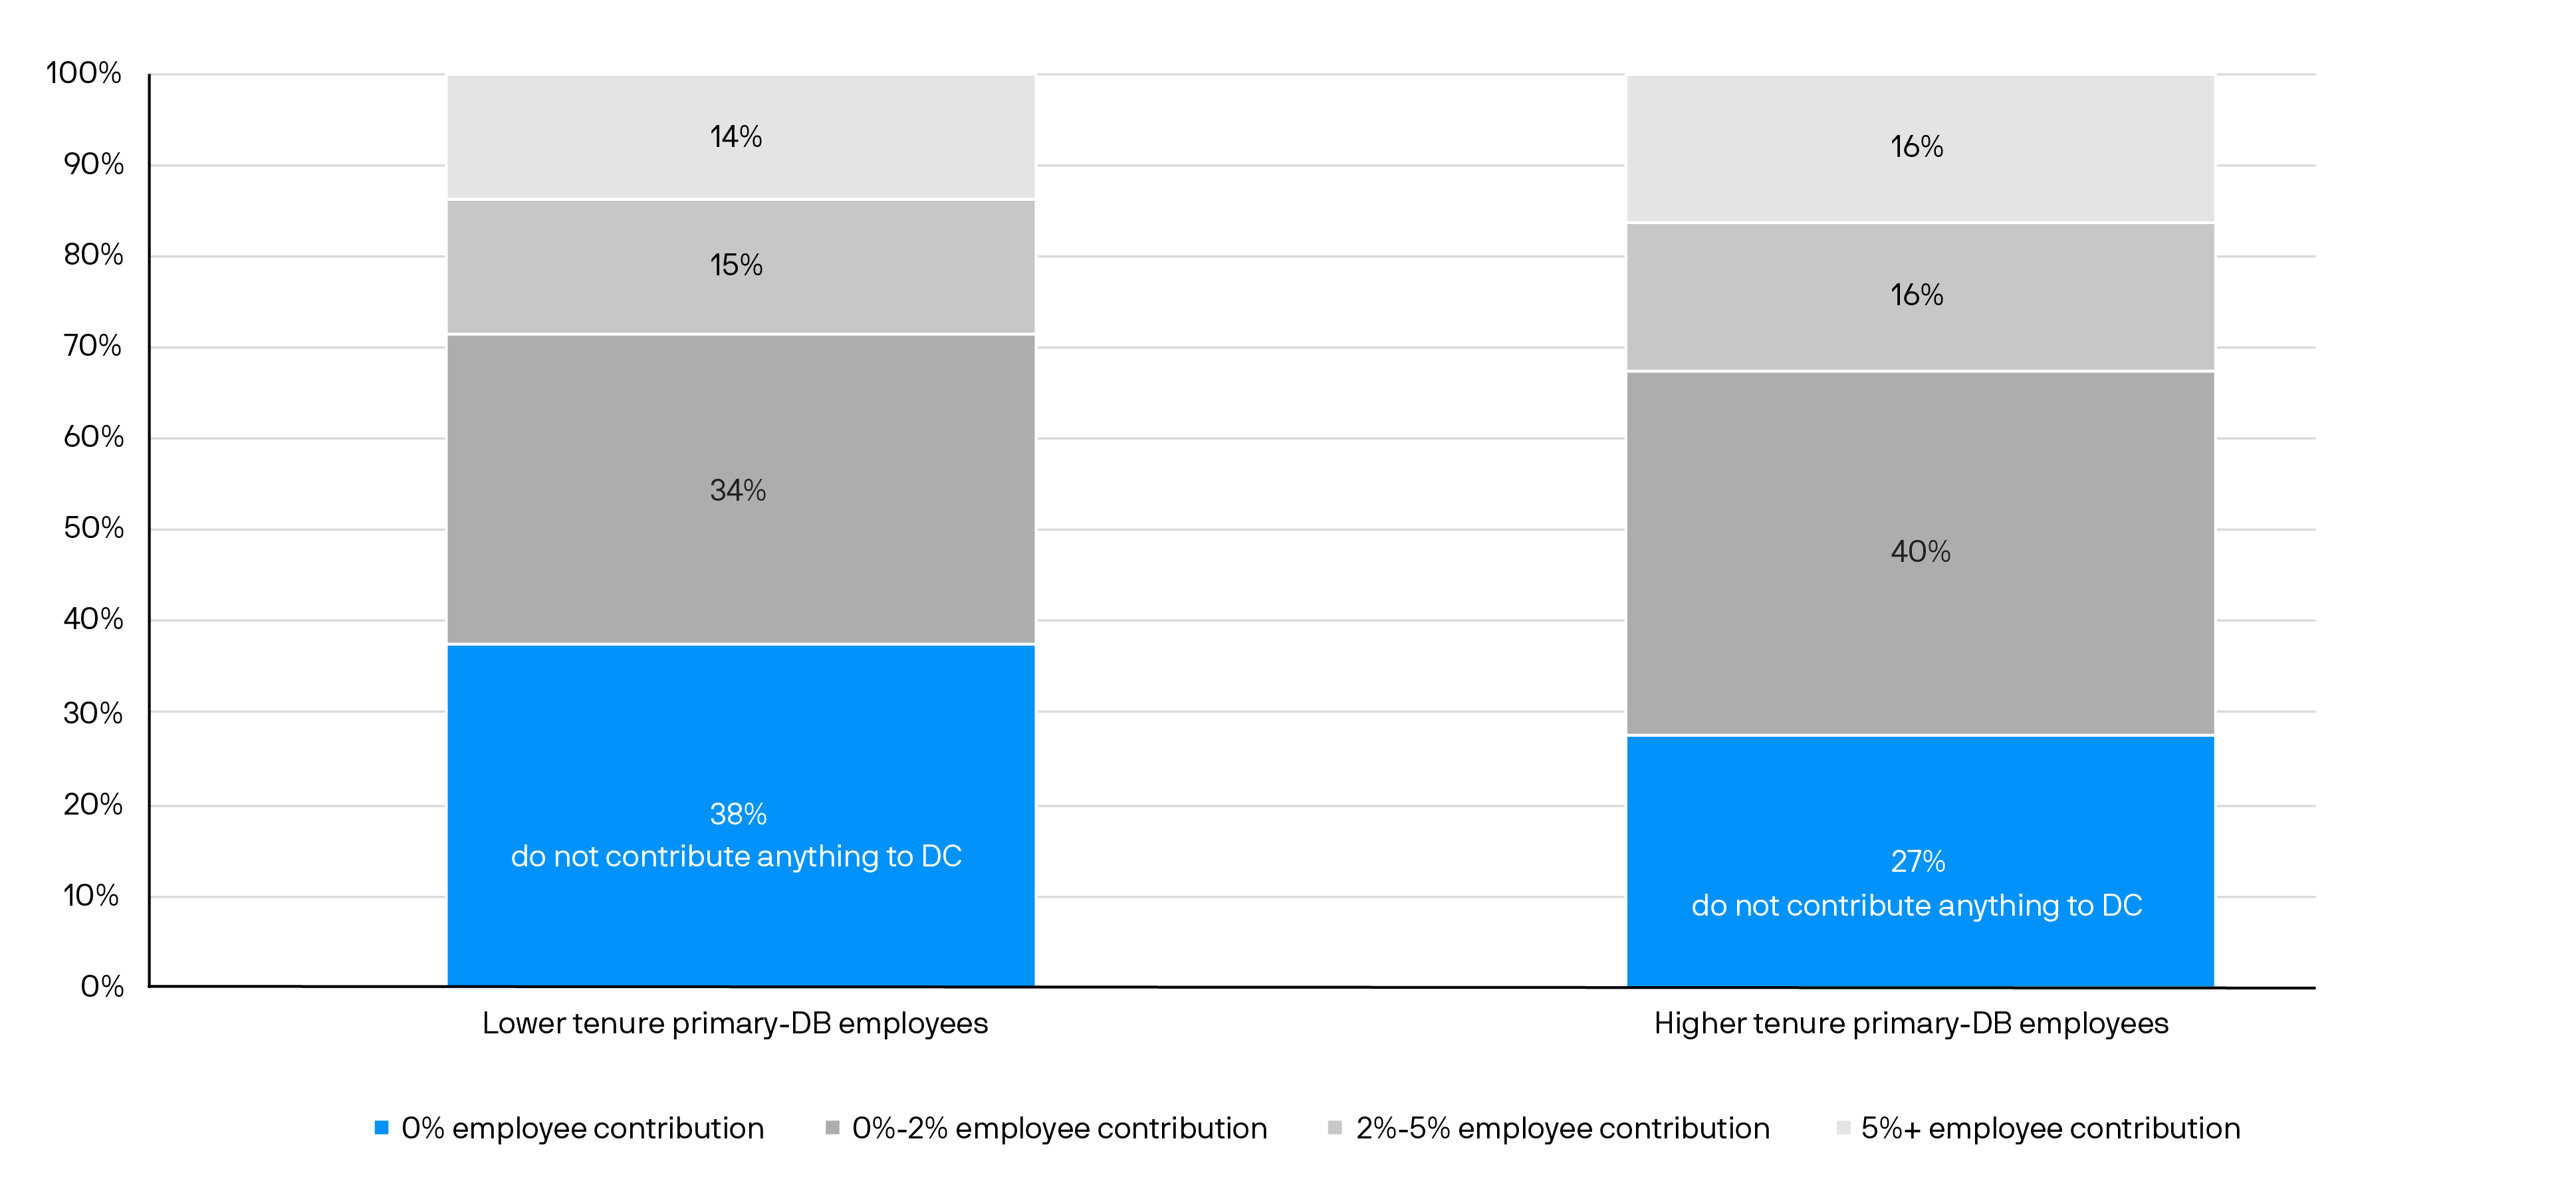 Exhibit 4: This chart shows the distribution of employee contributions as a percentage of income for lower tenure and higher tenure primary-DB populations.